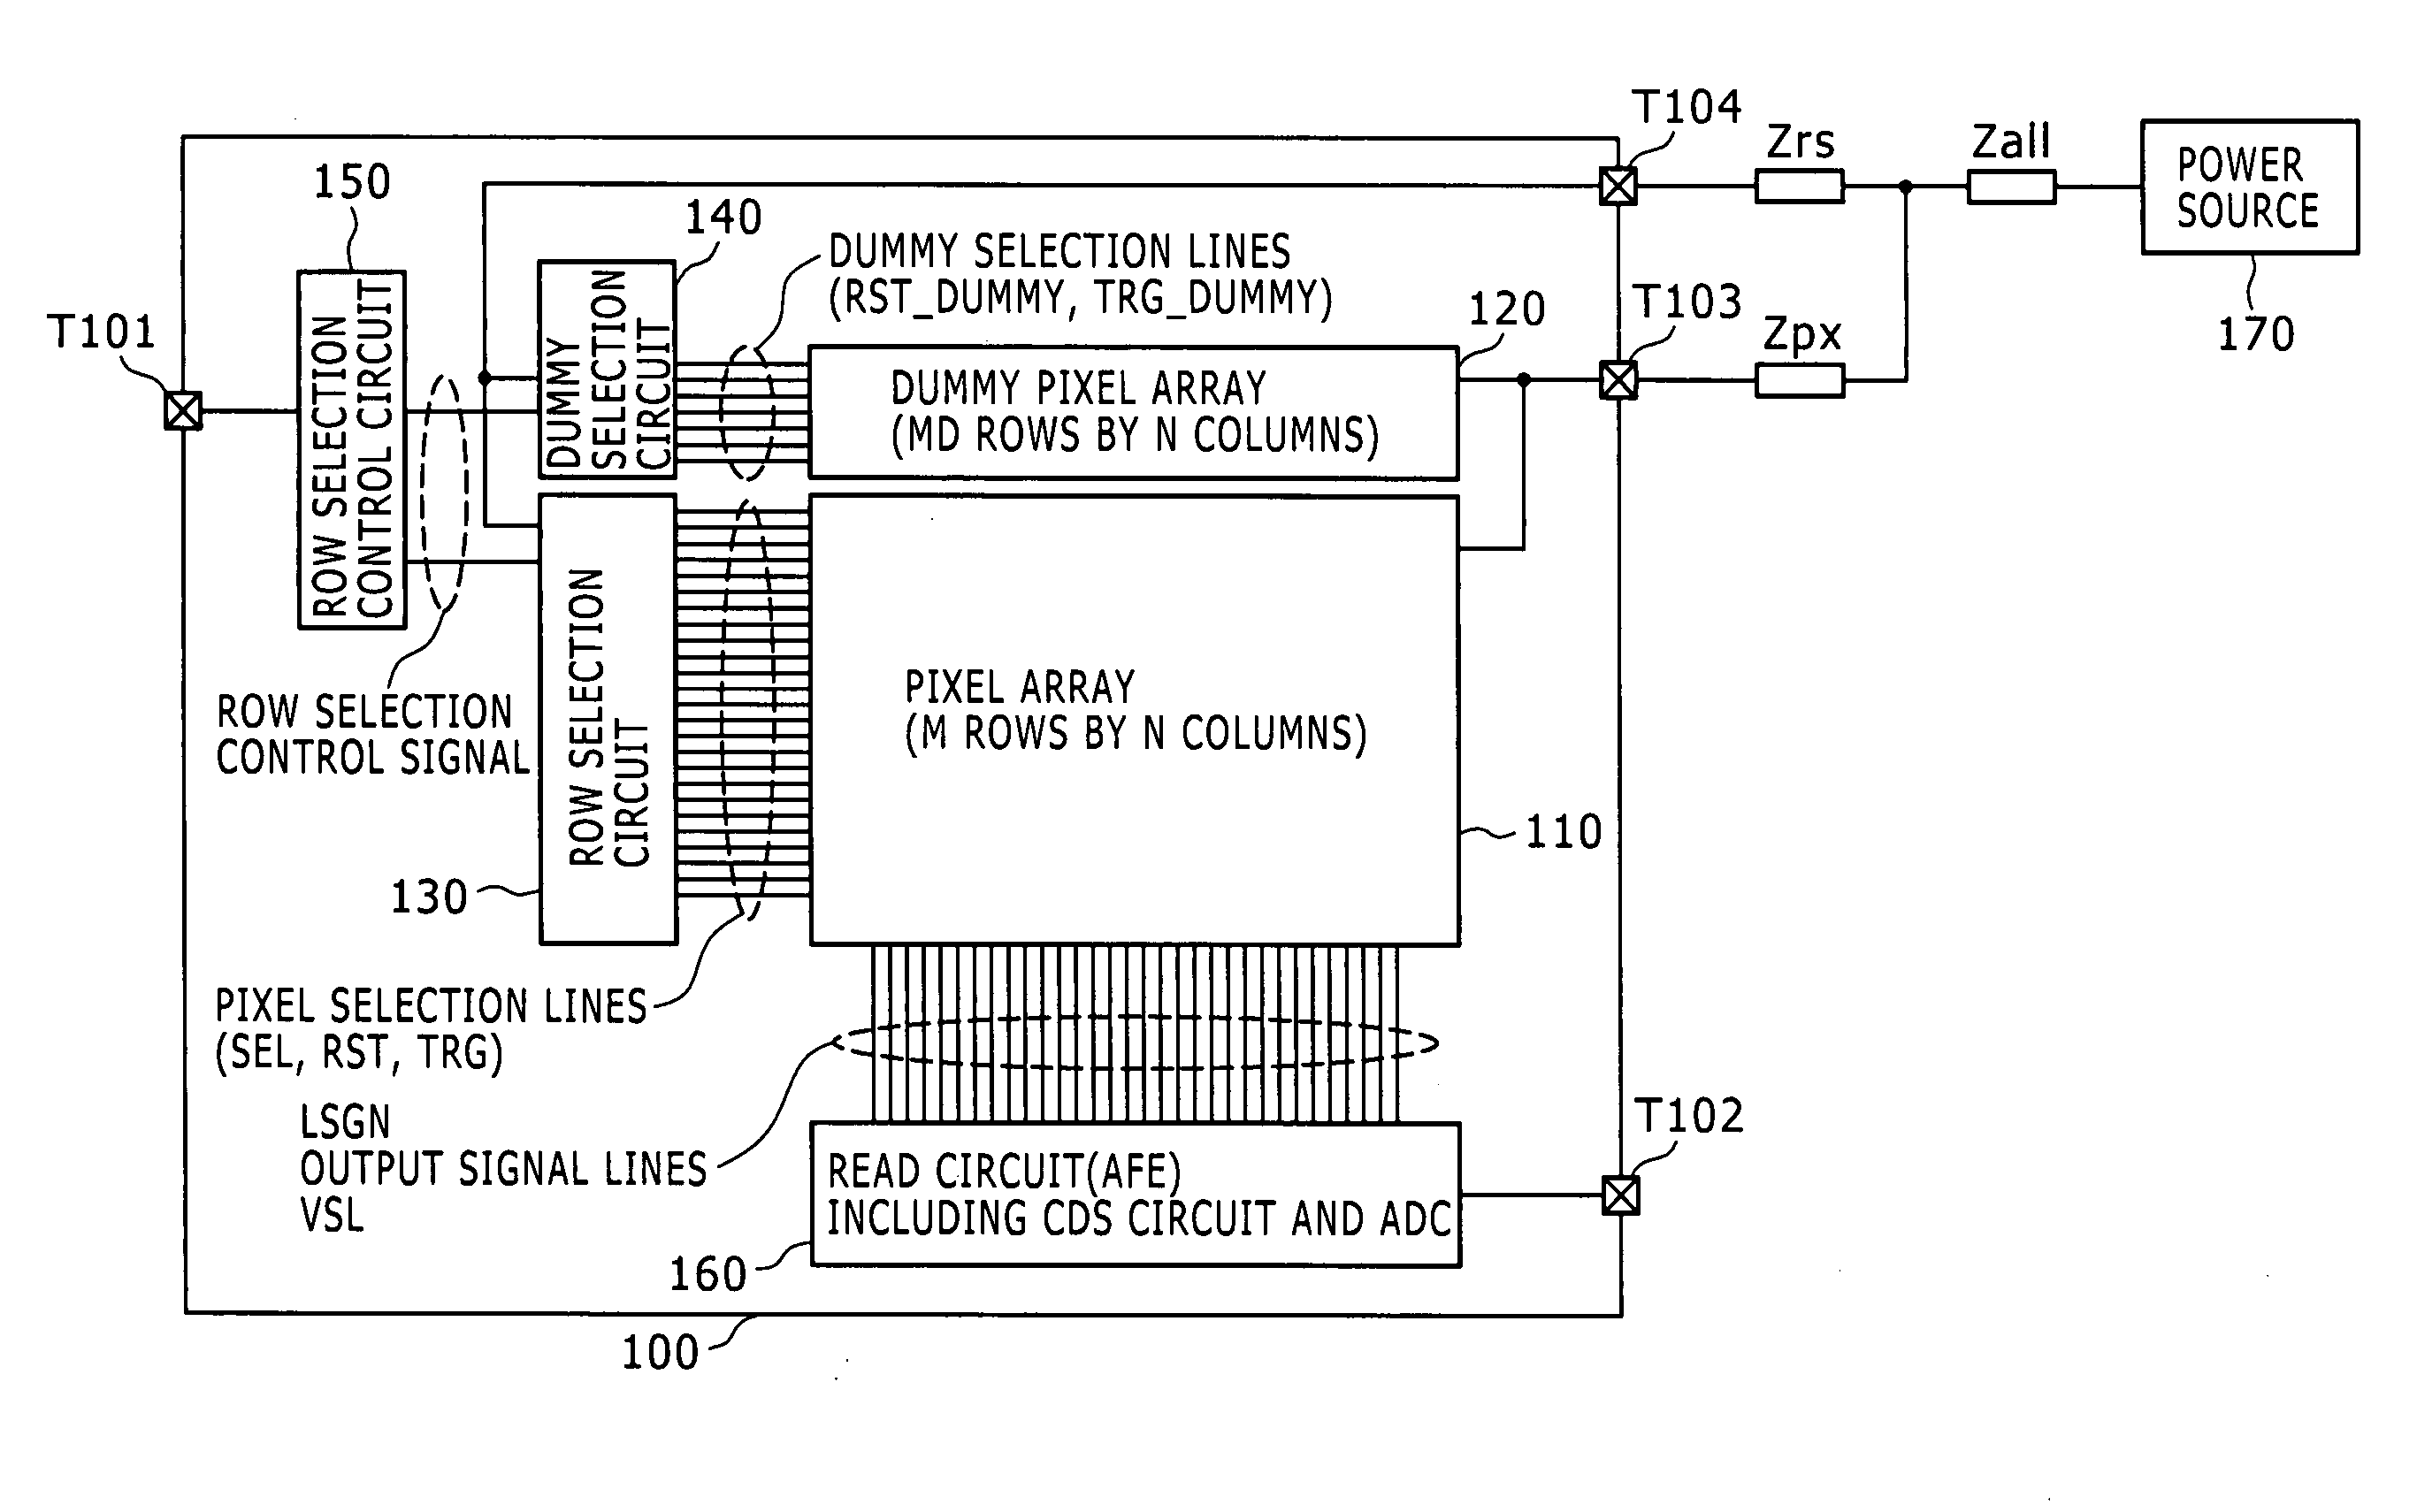 Solid-state imaging element and camera system